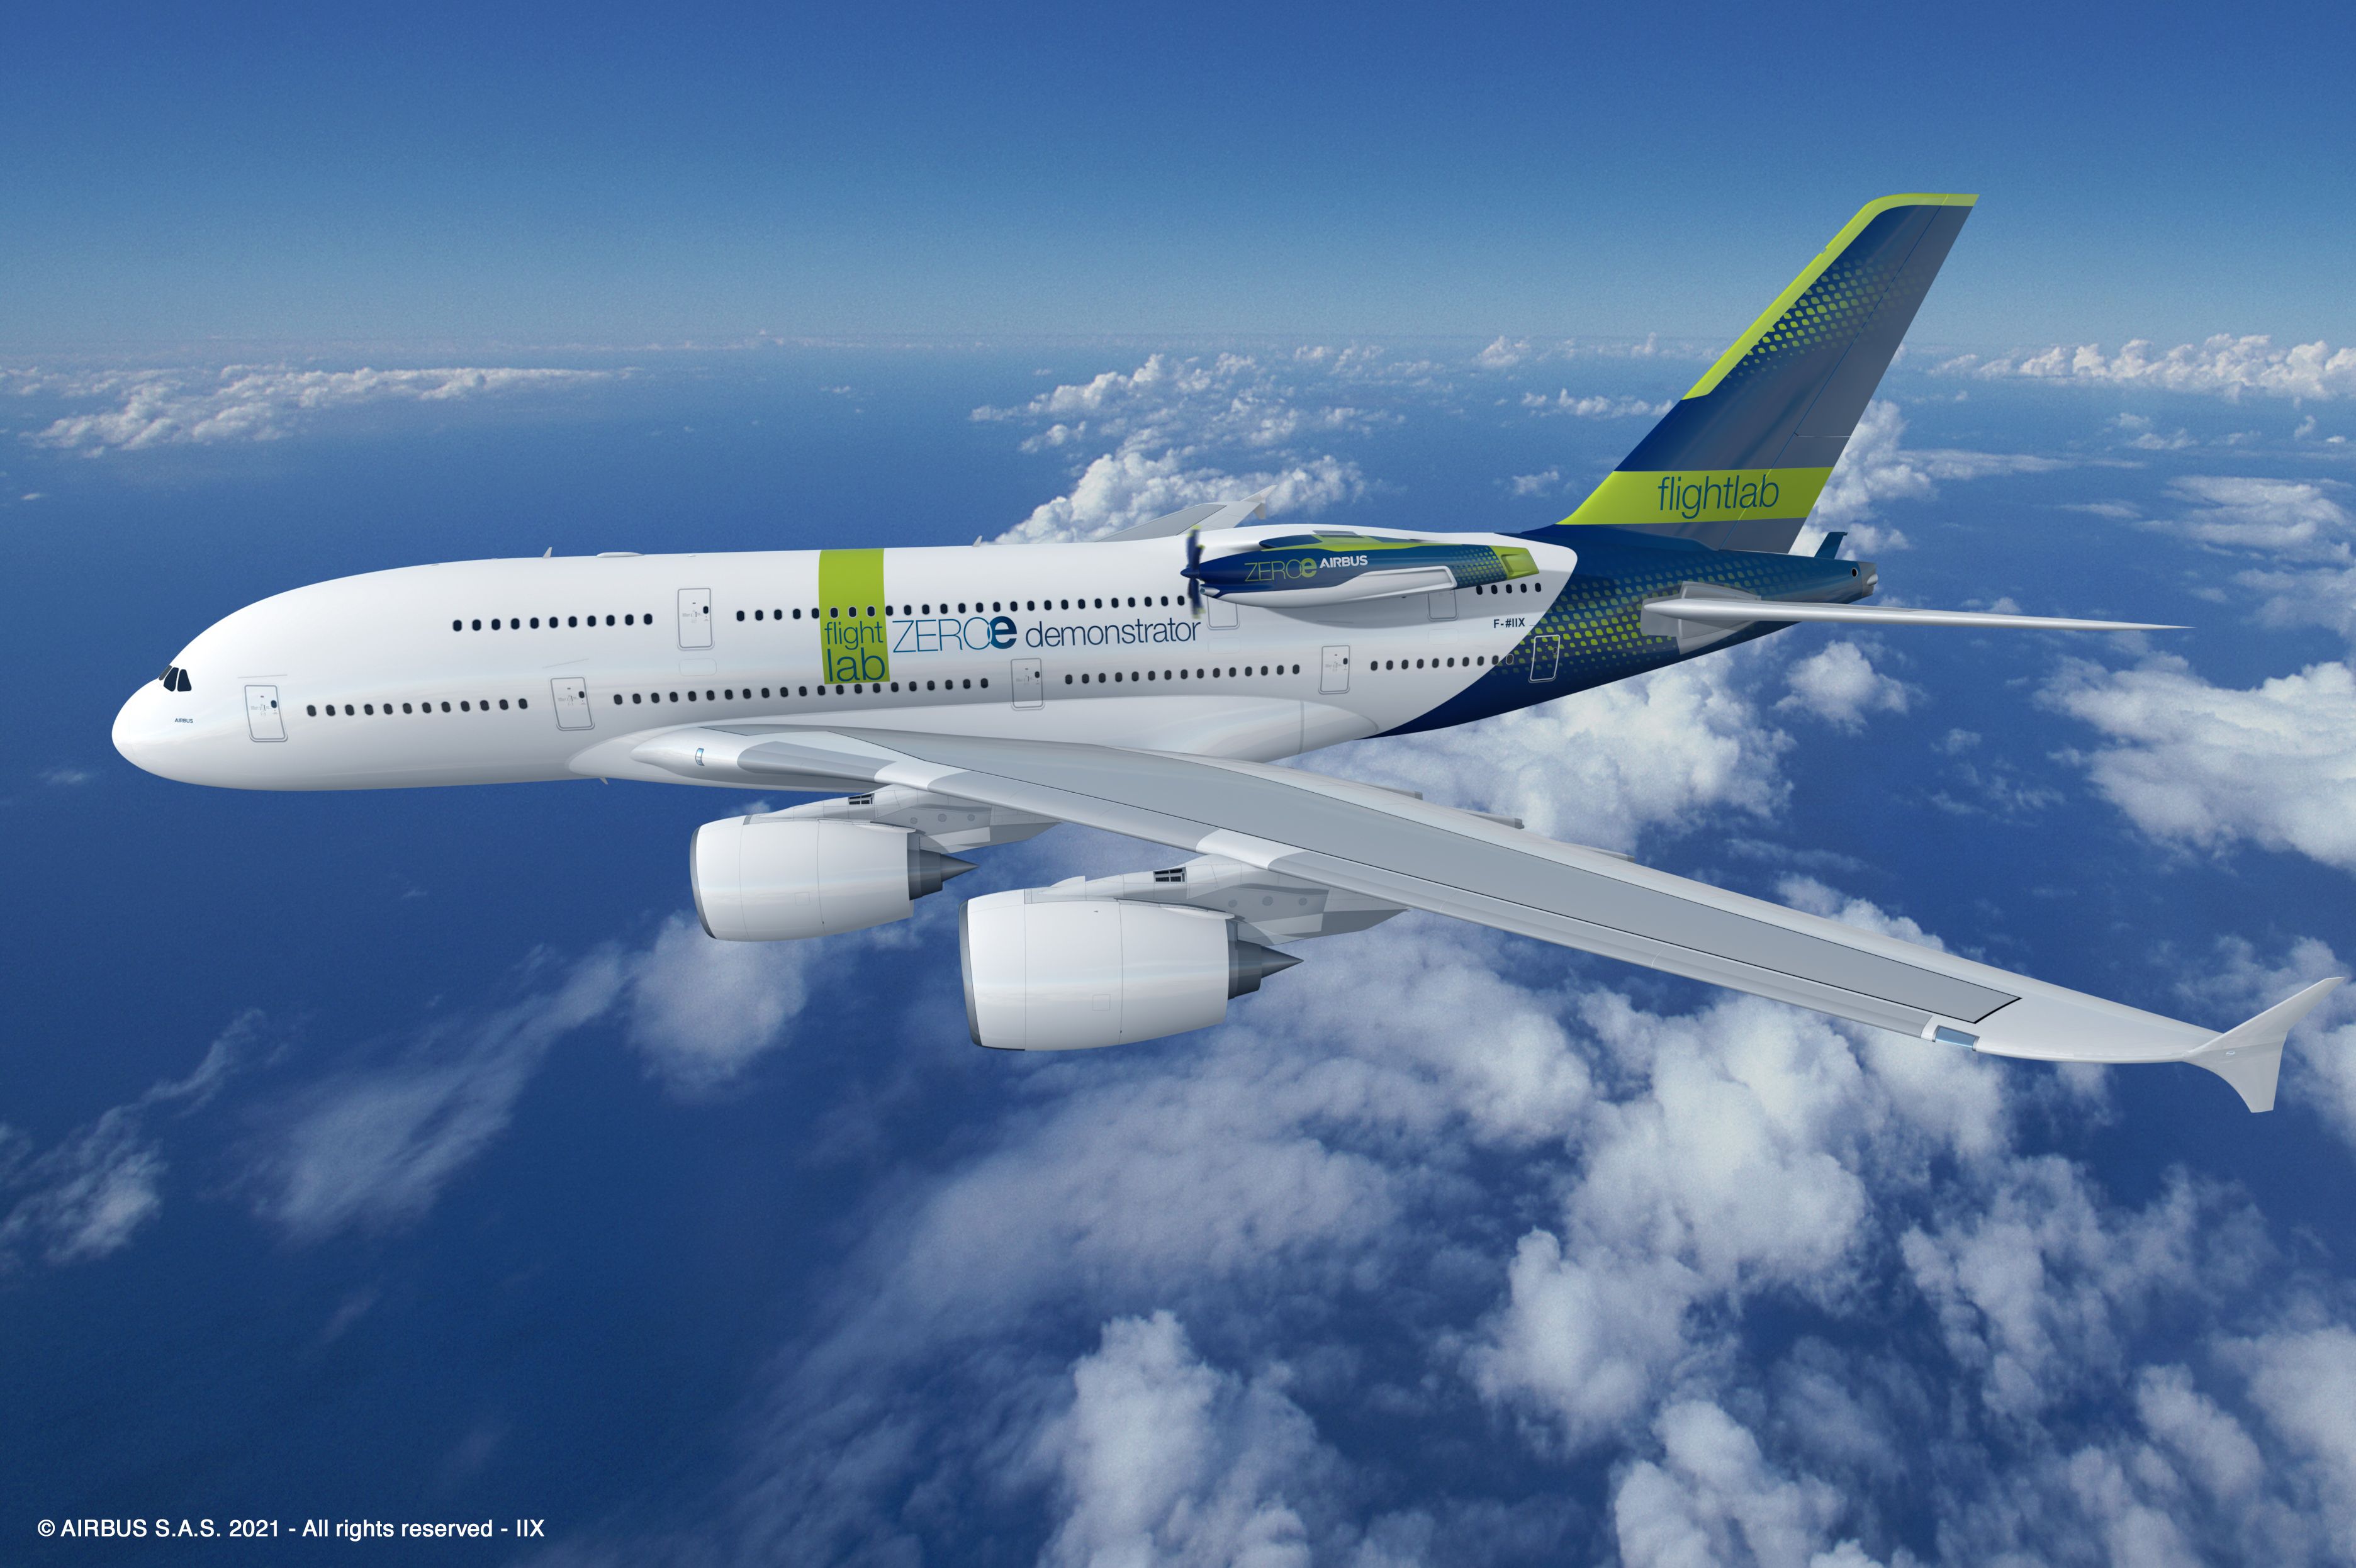 A380 fuel cell demonstrator aircraft rendering